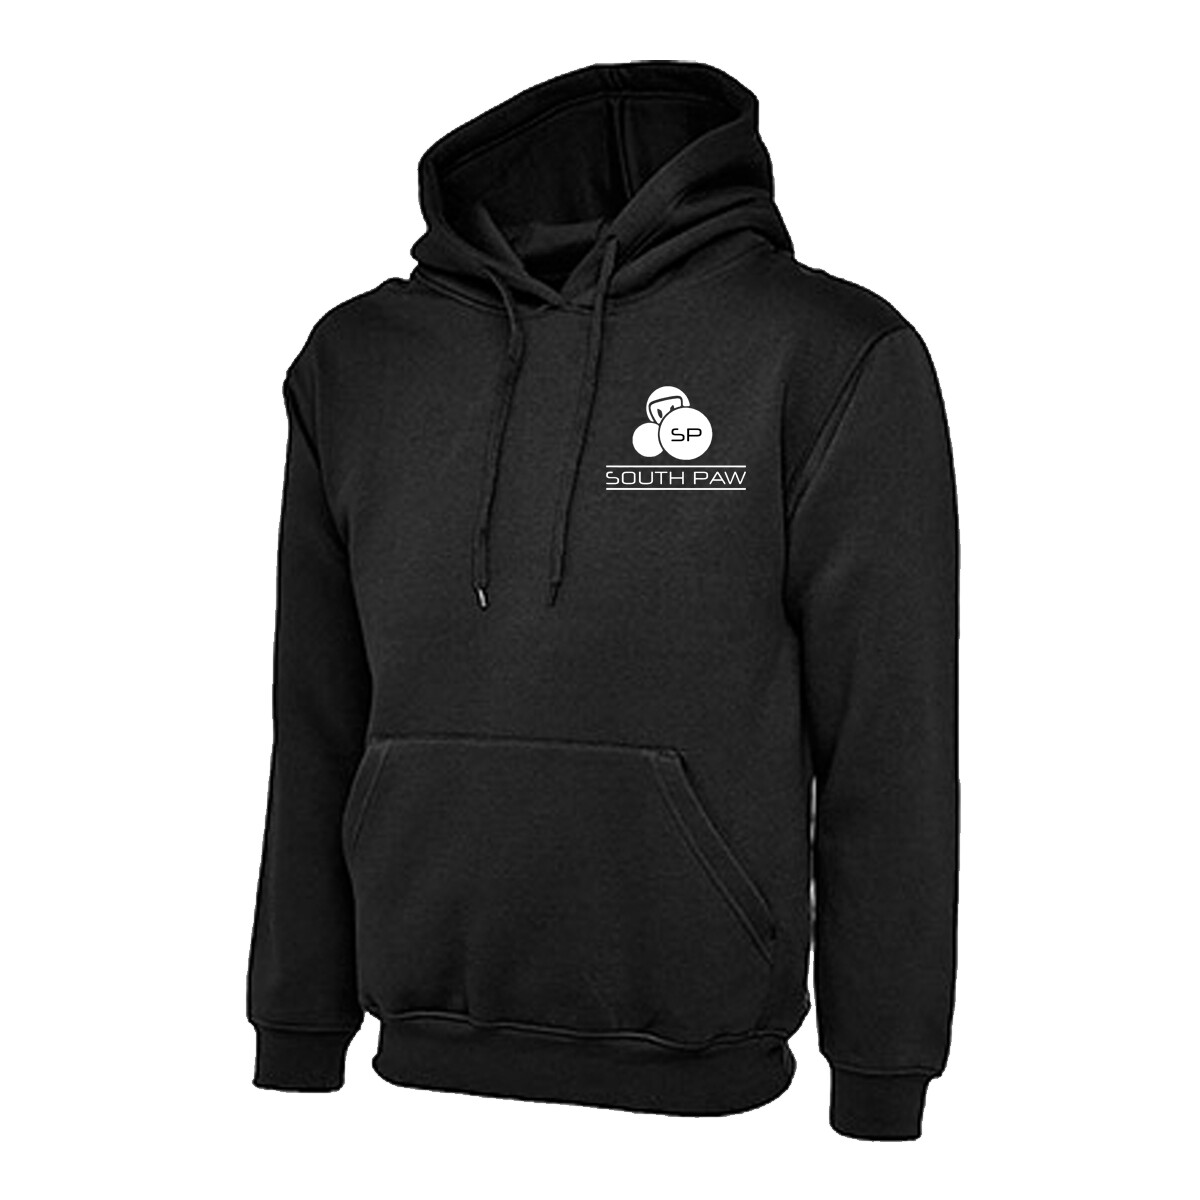 Official Southpaw Black Hoodie